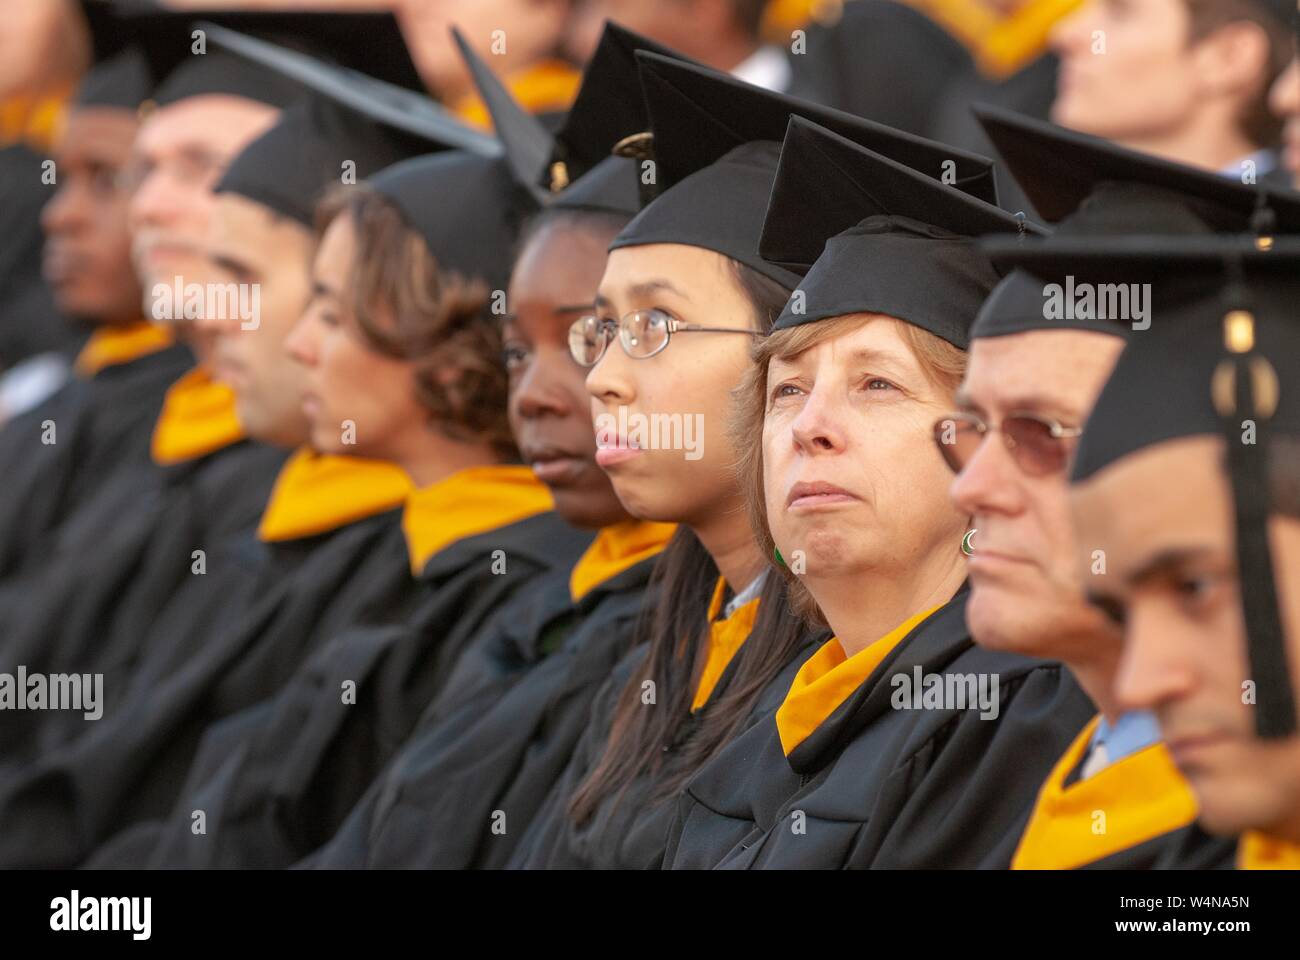 engineering-graduands-wearing-caps-and-gowns-sit-in-a-row-during-a-graduation-ceremony-at-the